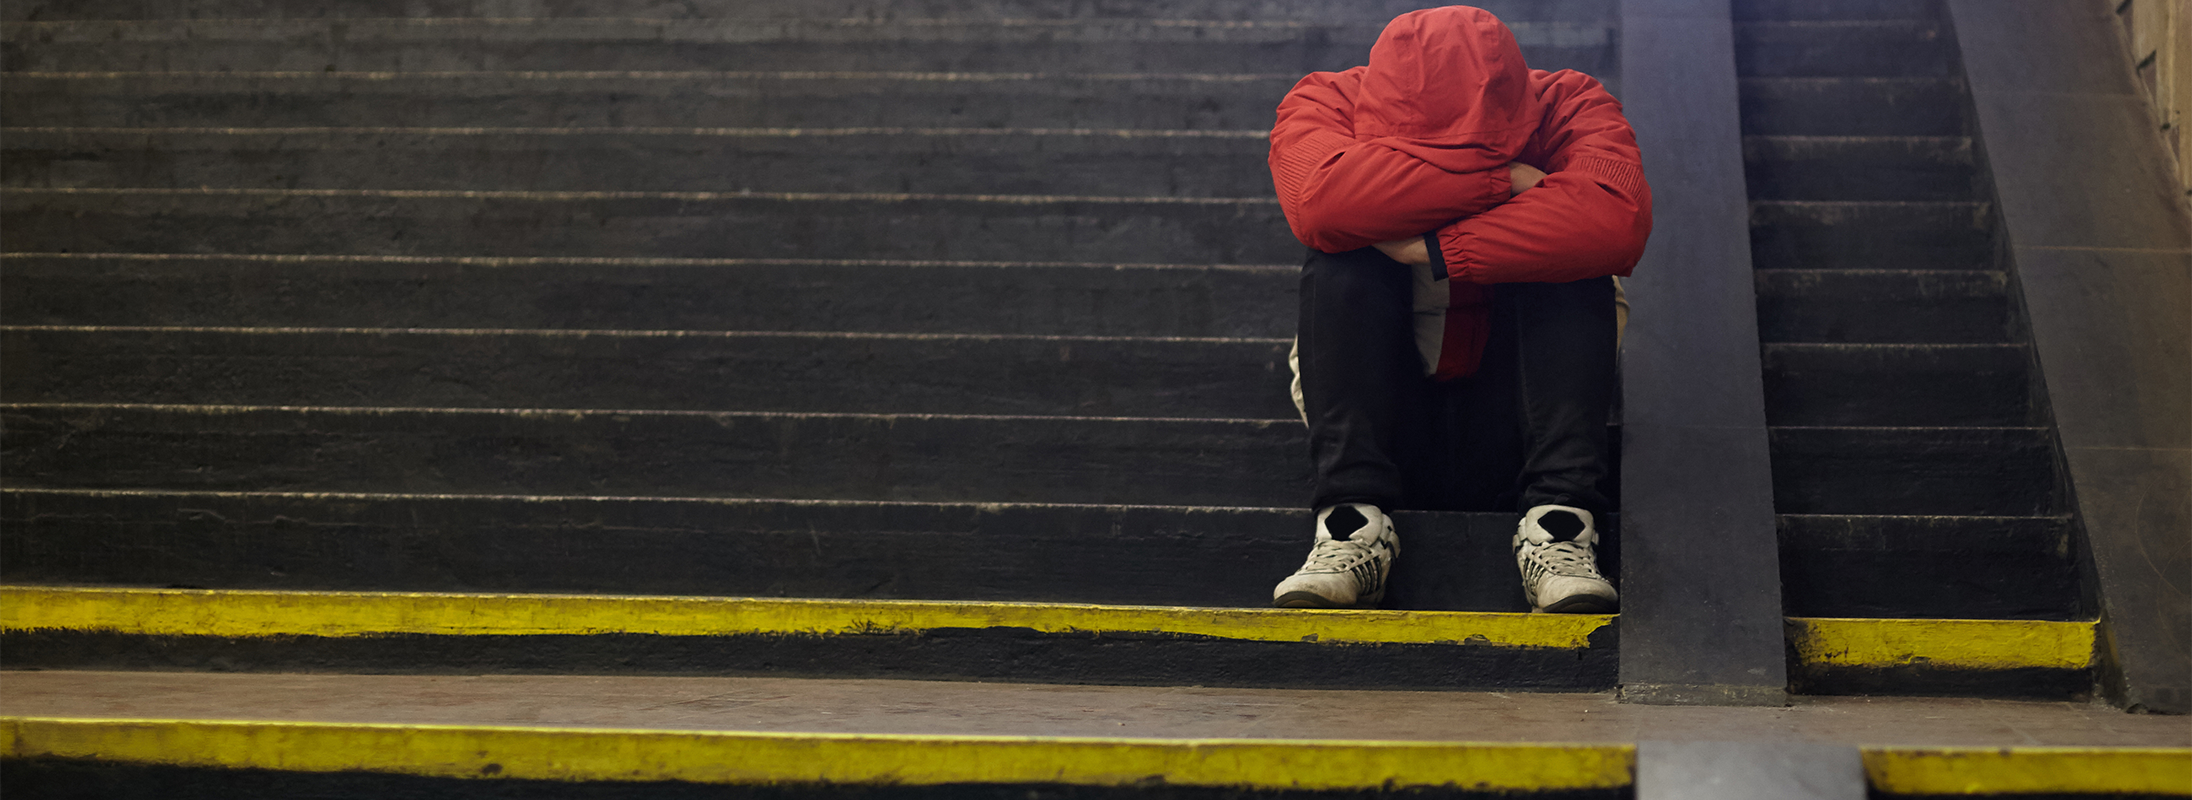 Youth sitting on steps in red jacket